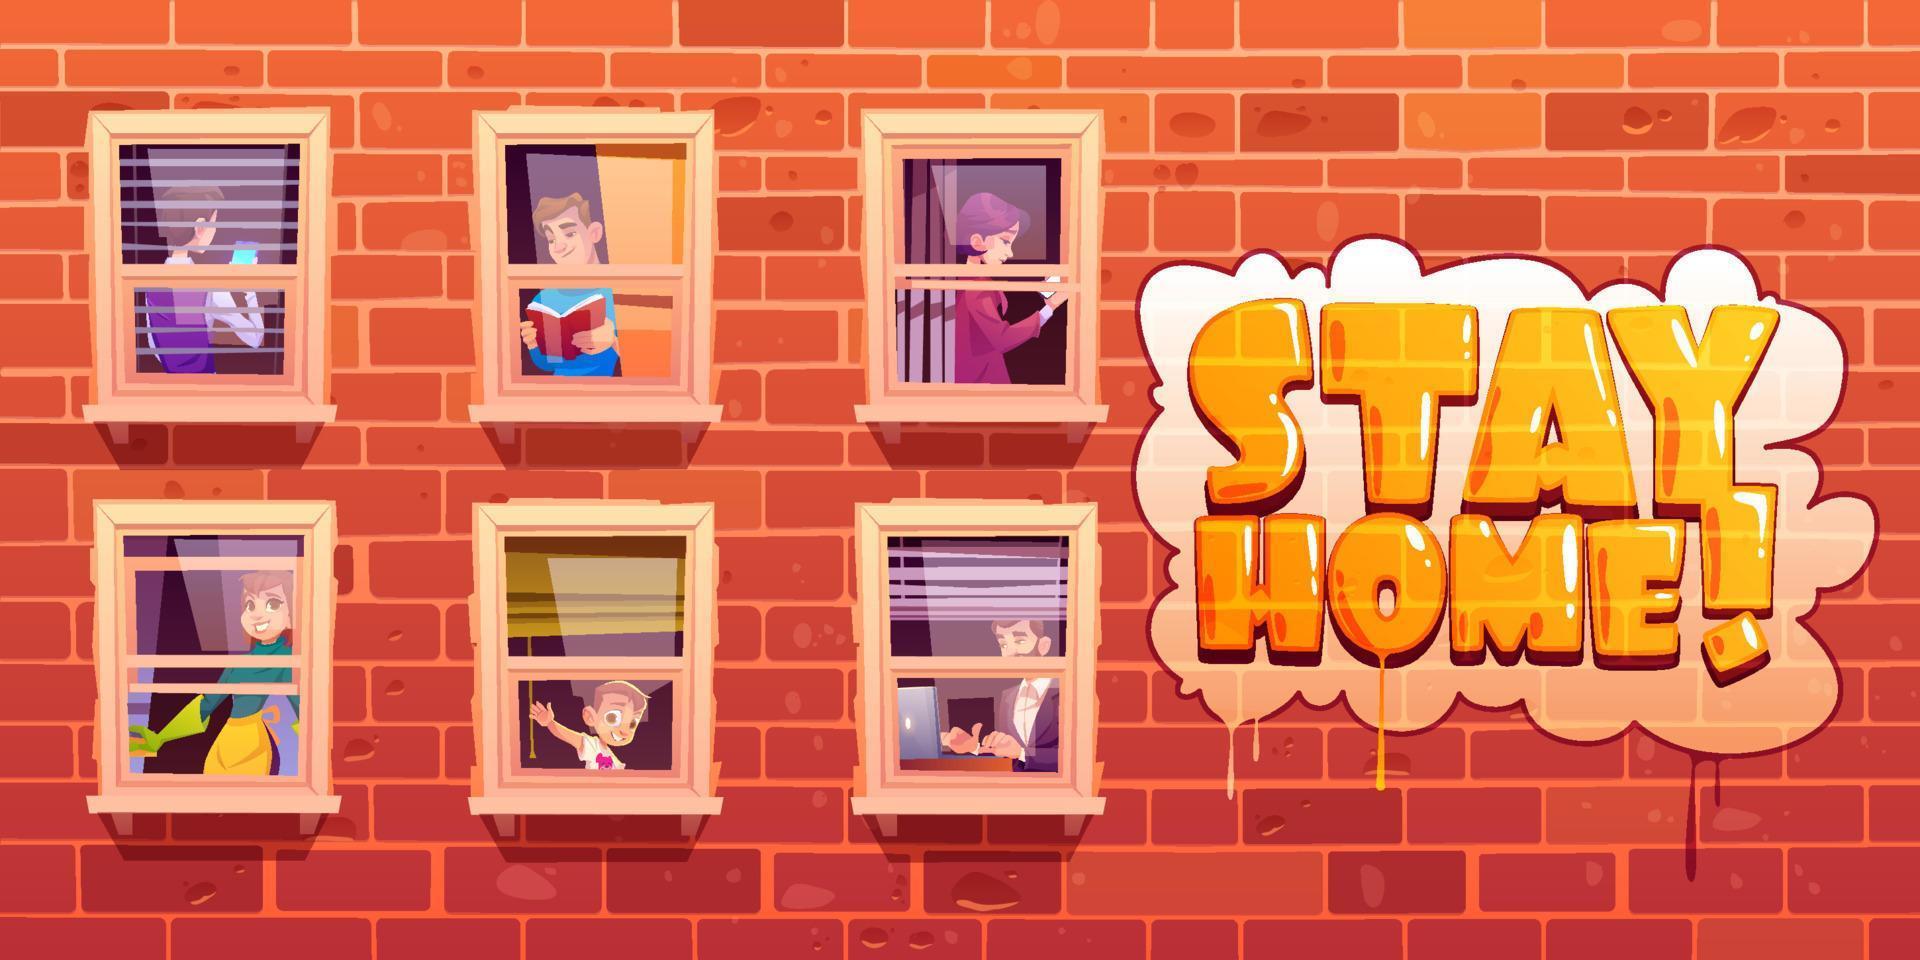 Stay home poster with people in windows vector